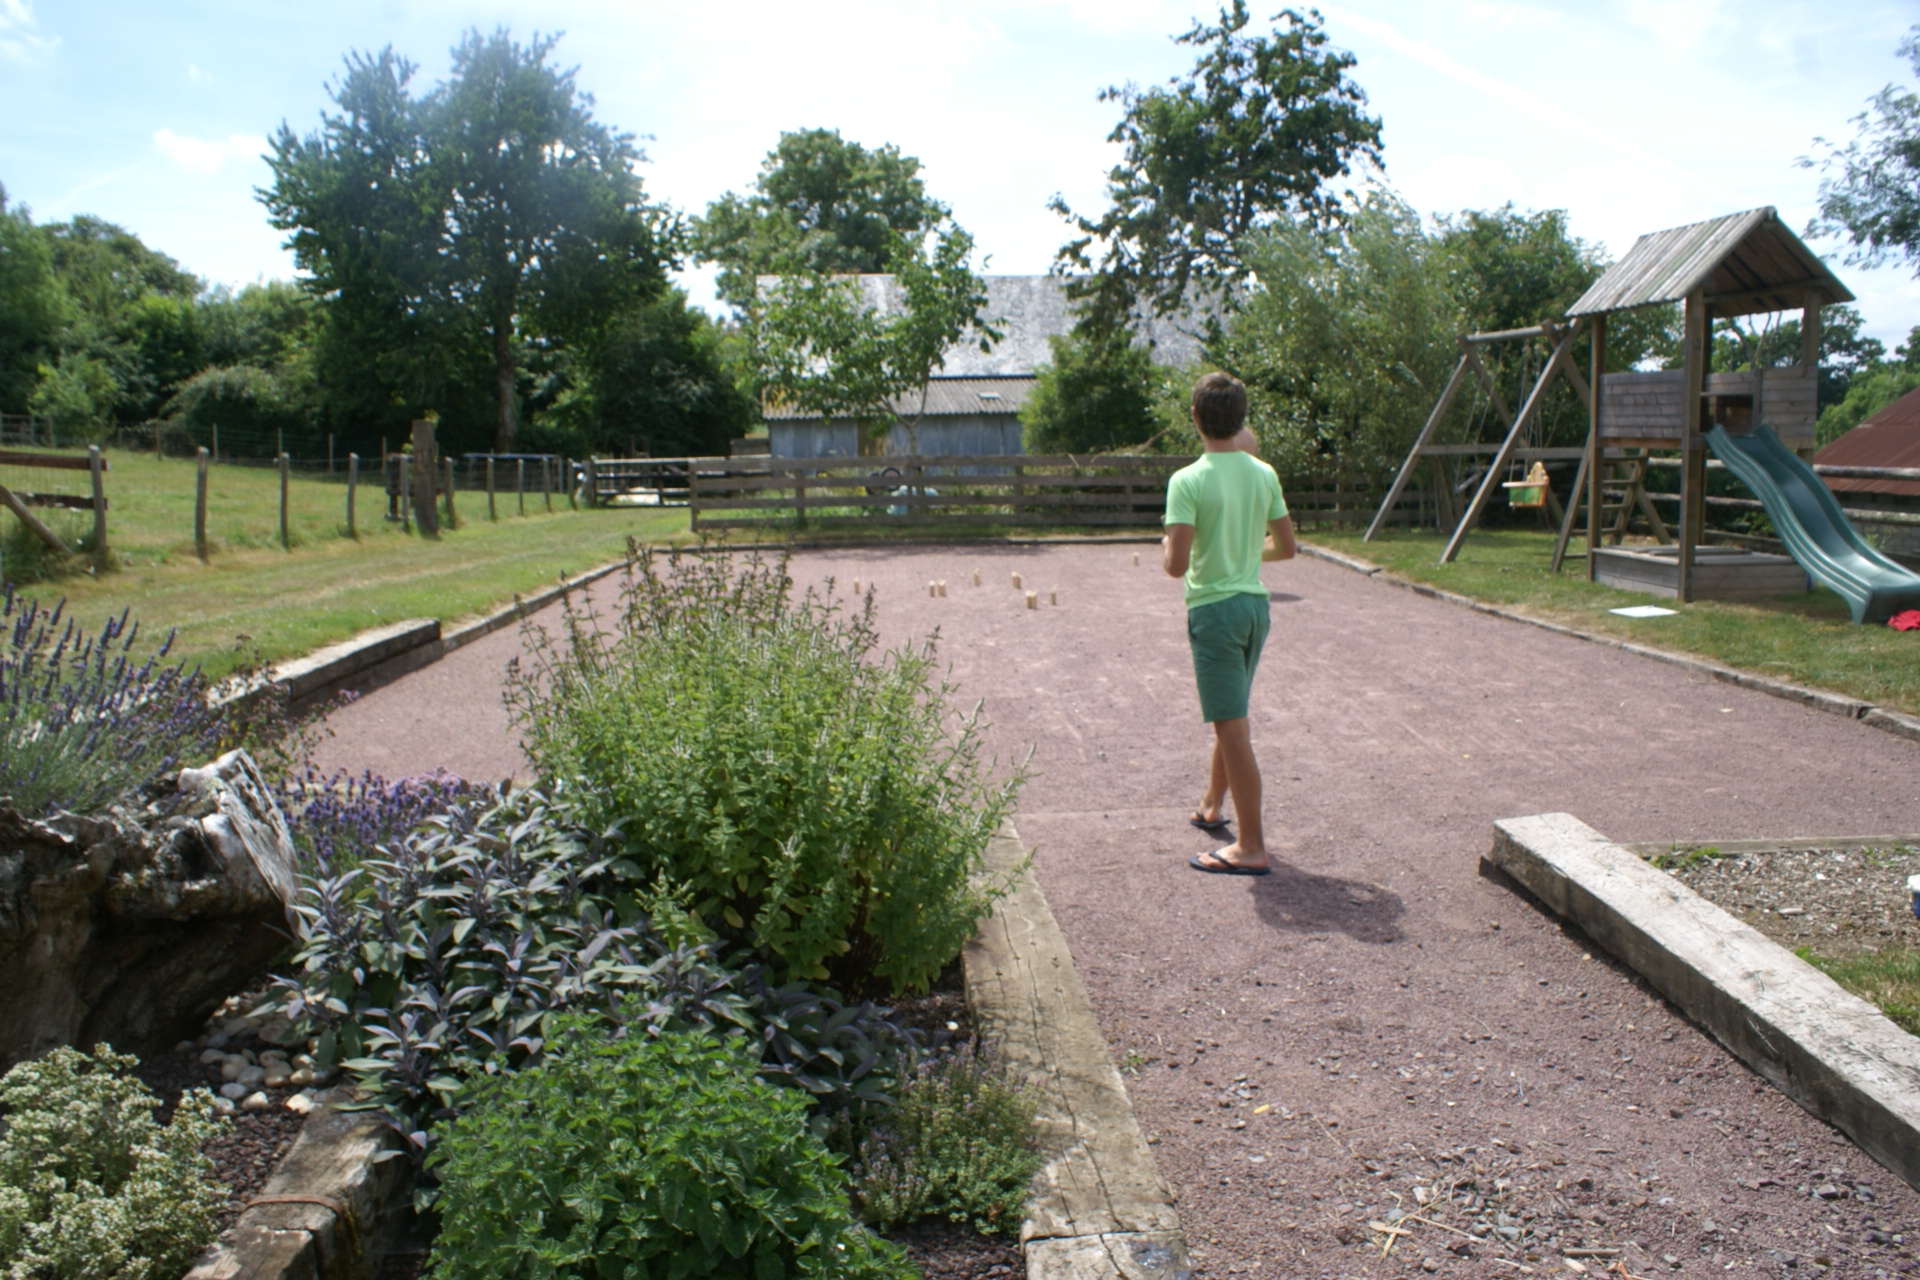 Play area at Eco-GItes of Lenault, a holiday home in Normandy, France